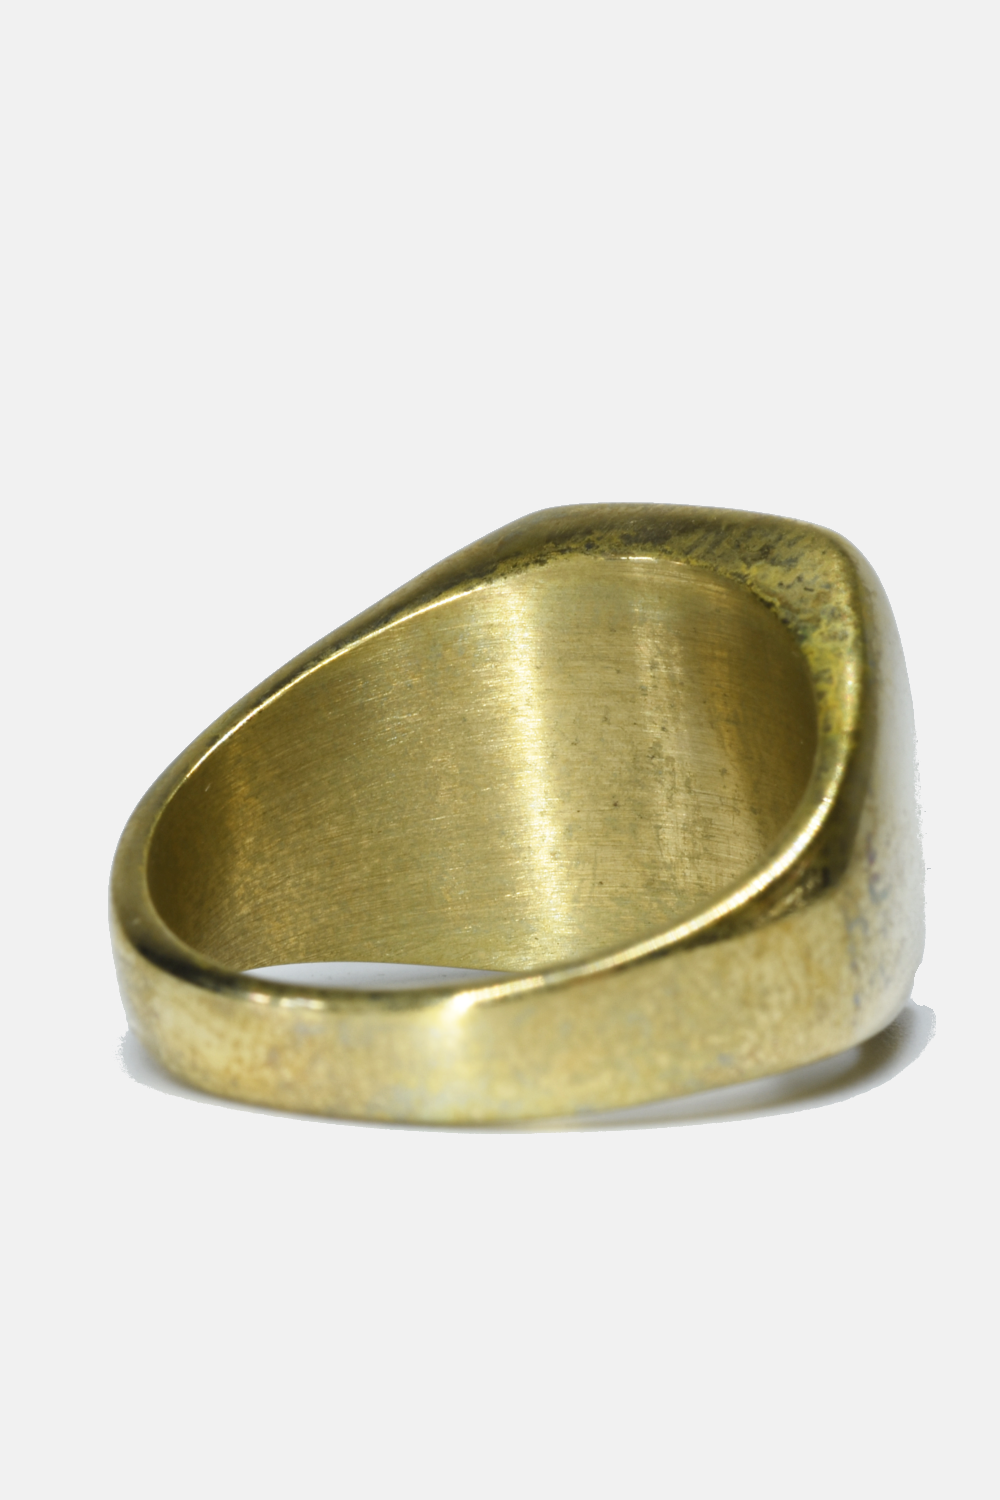 Curated Basics - Brass Square Striped Ring: 8